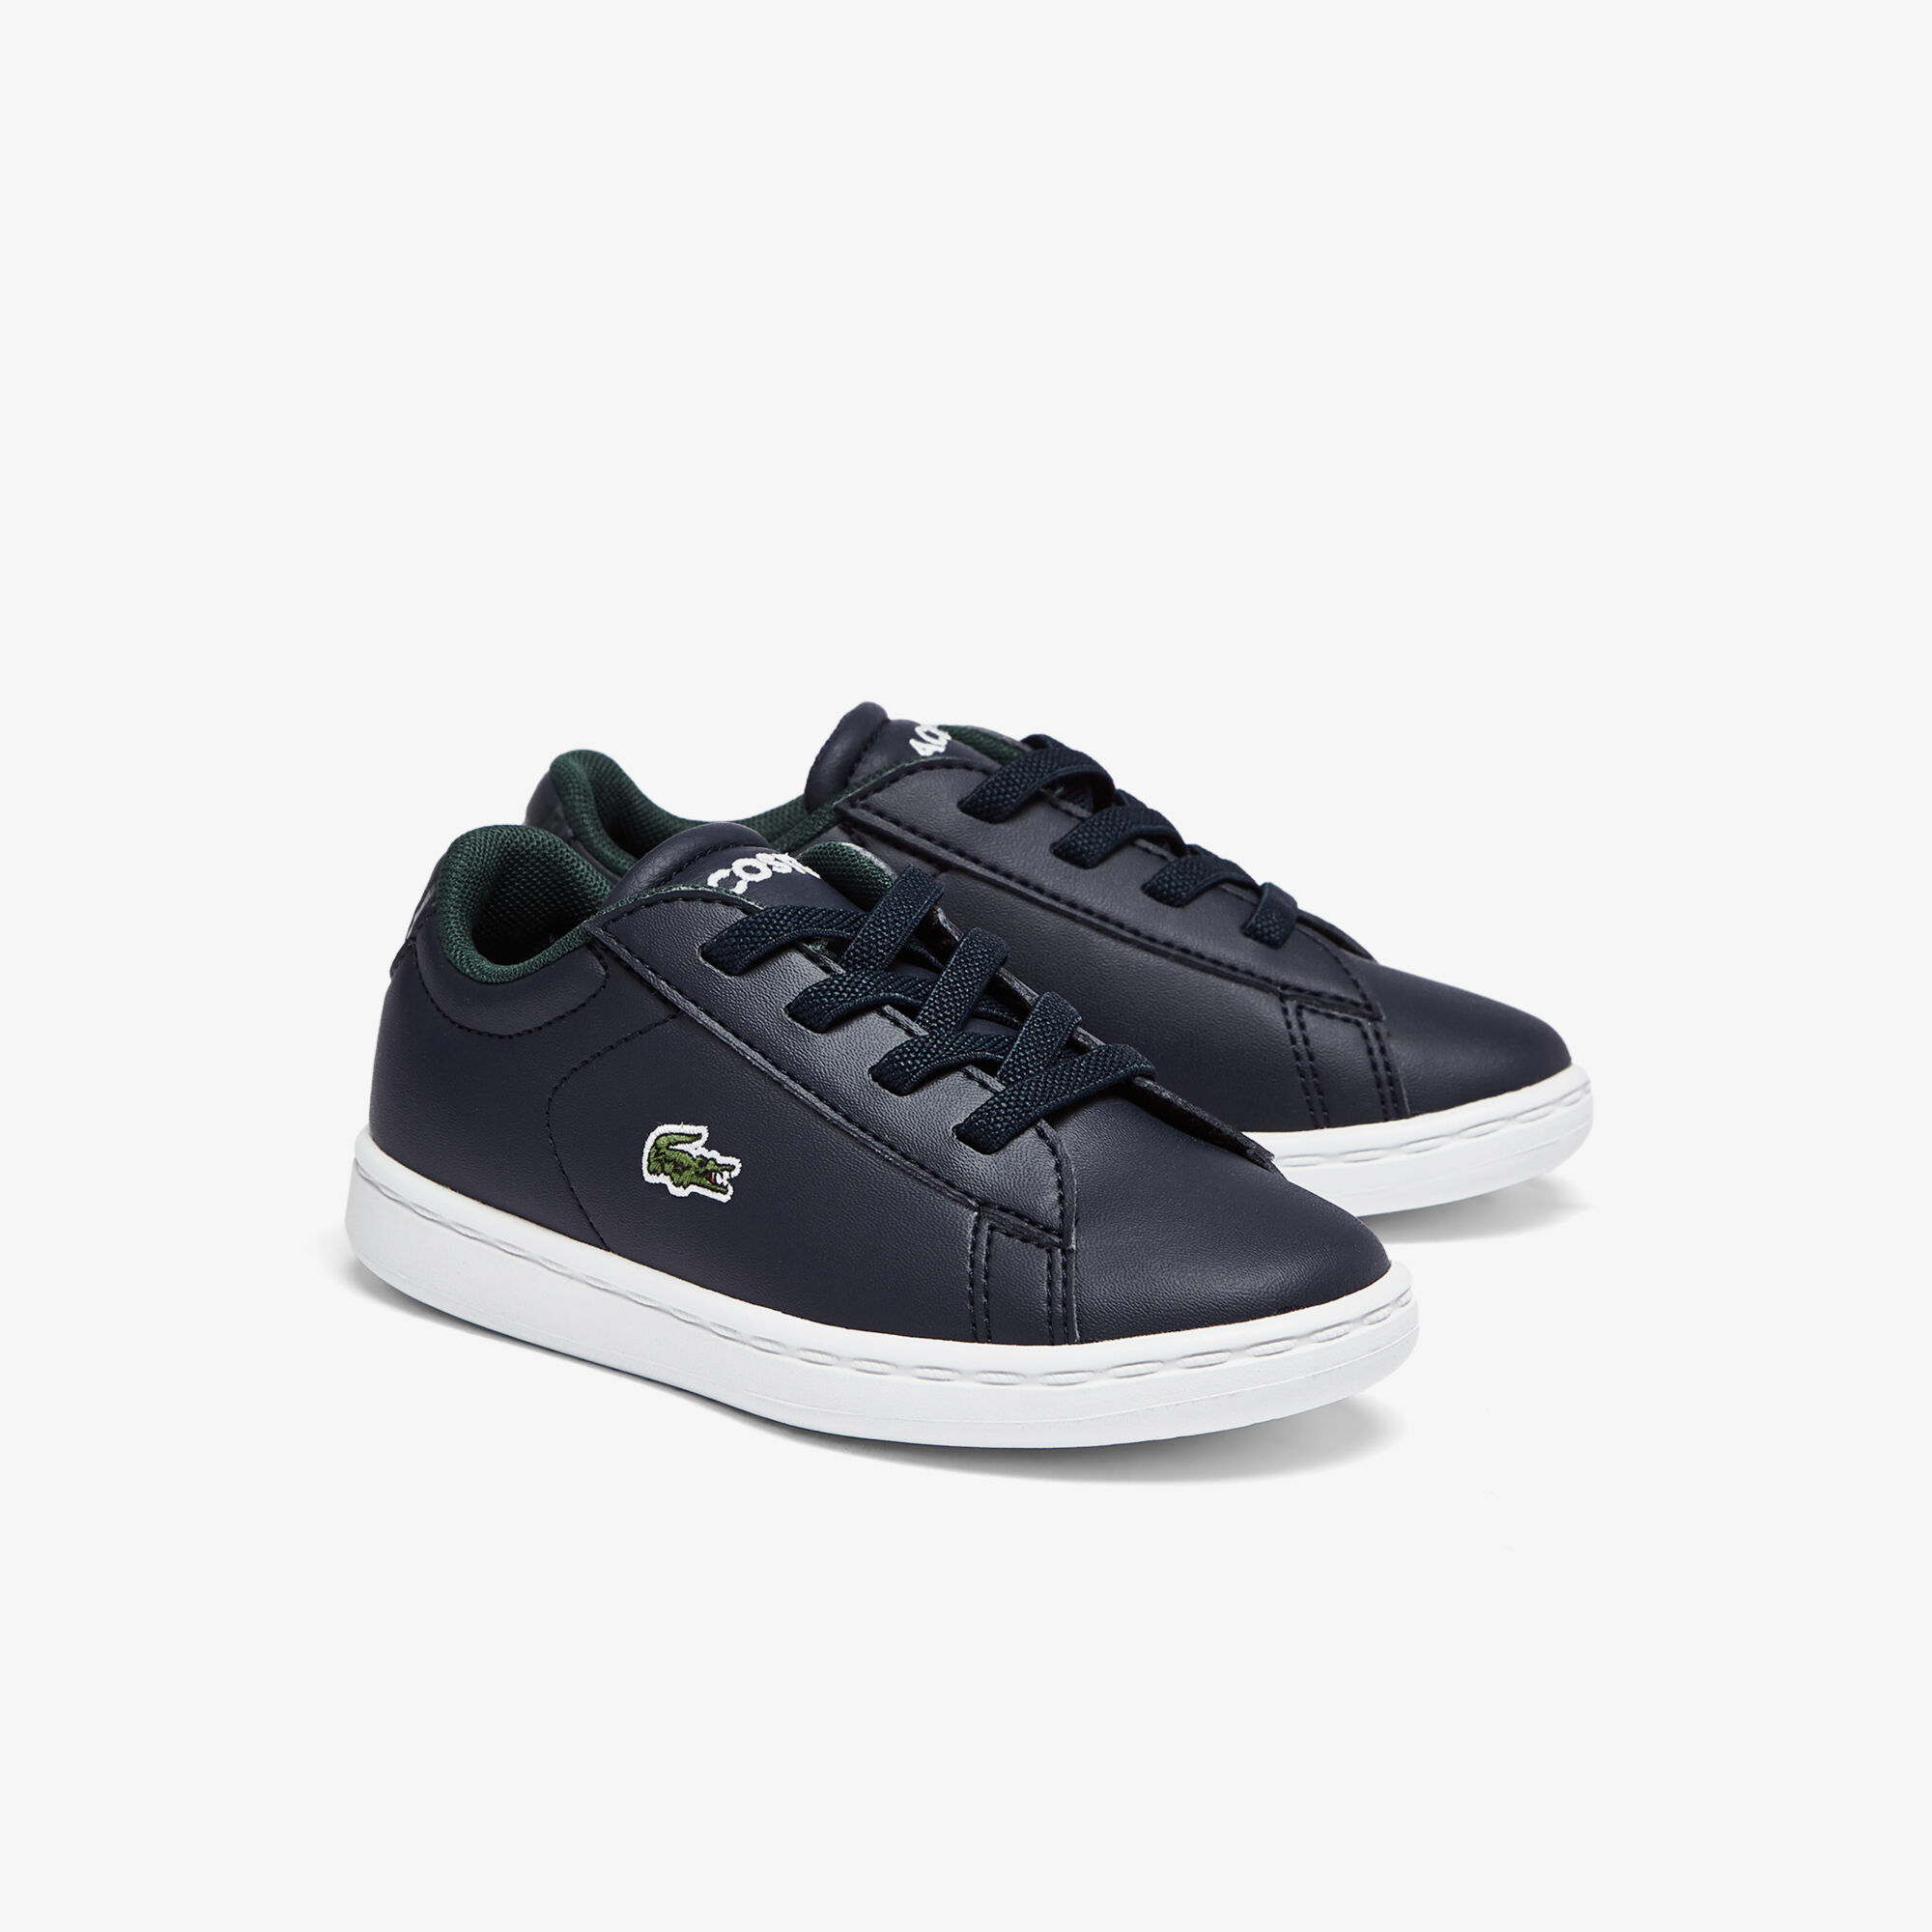 Infants' Carnaby Evo Synthetic Trainers